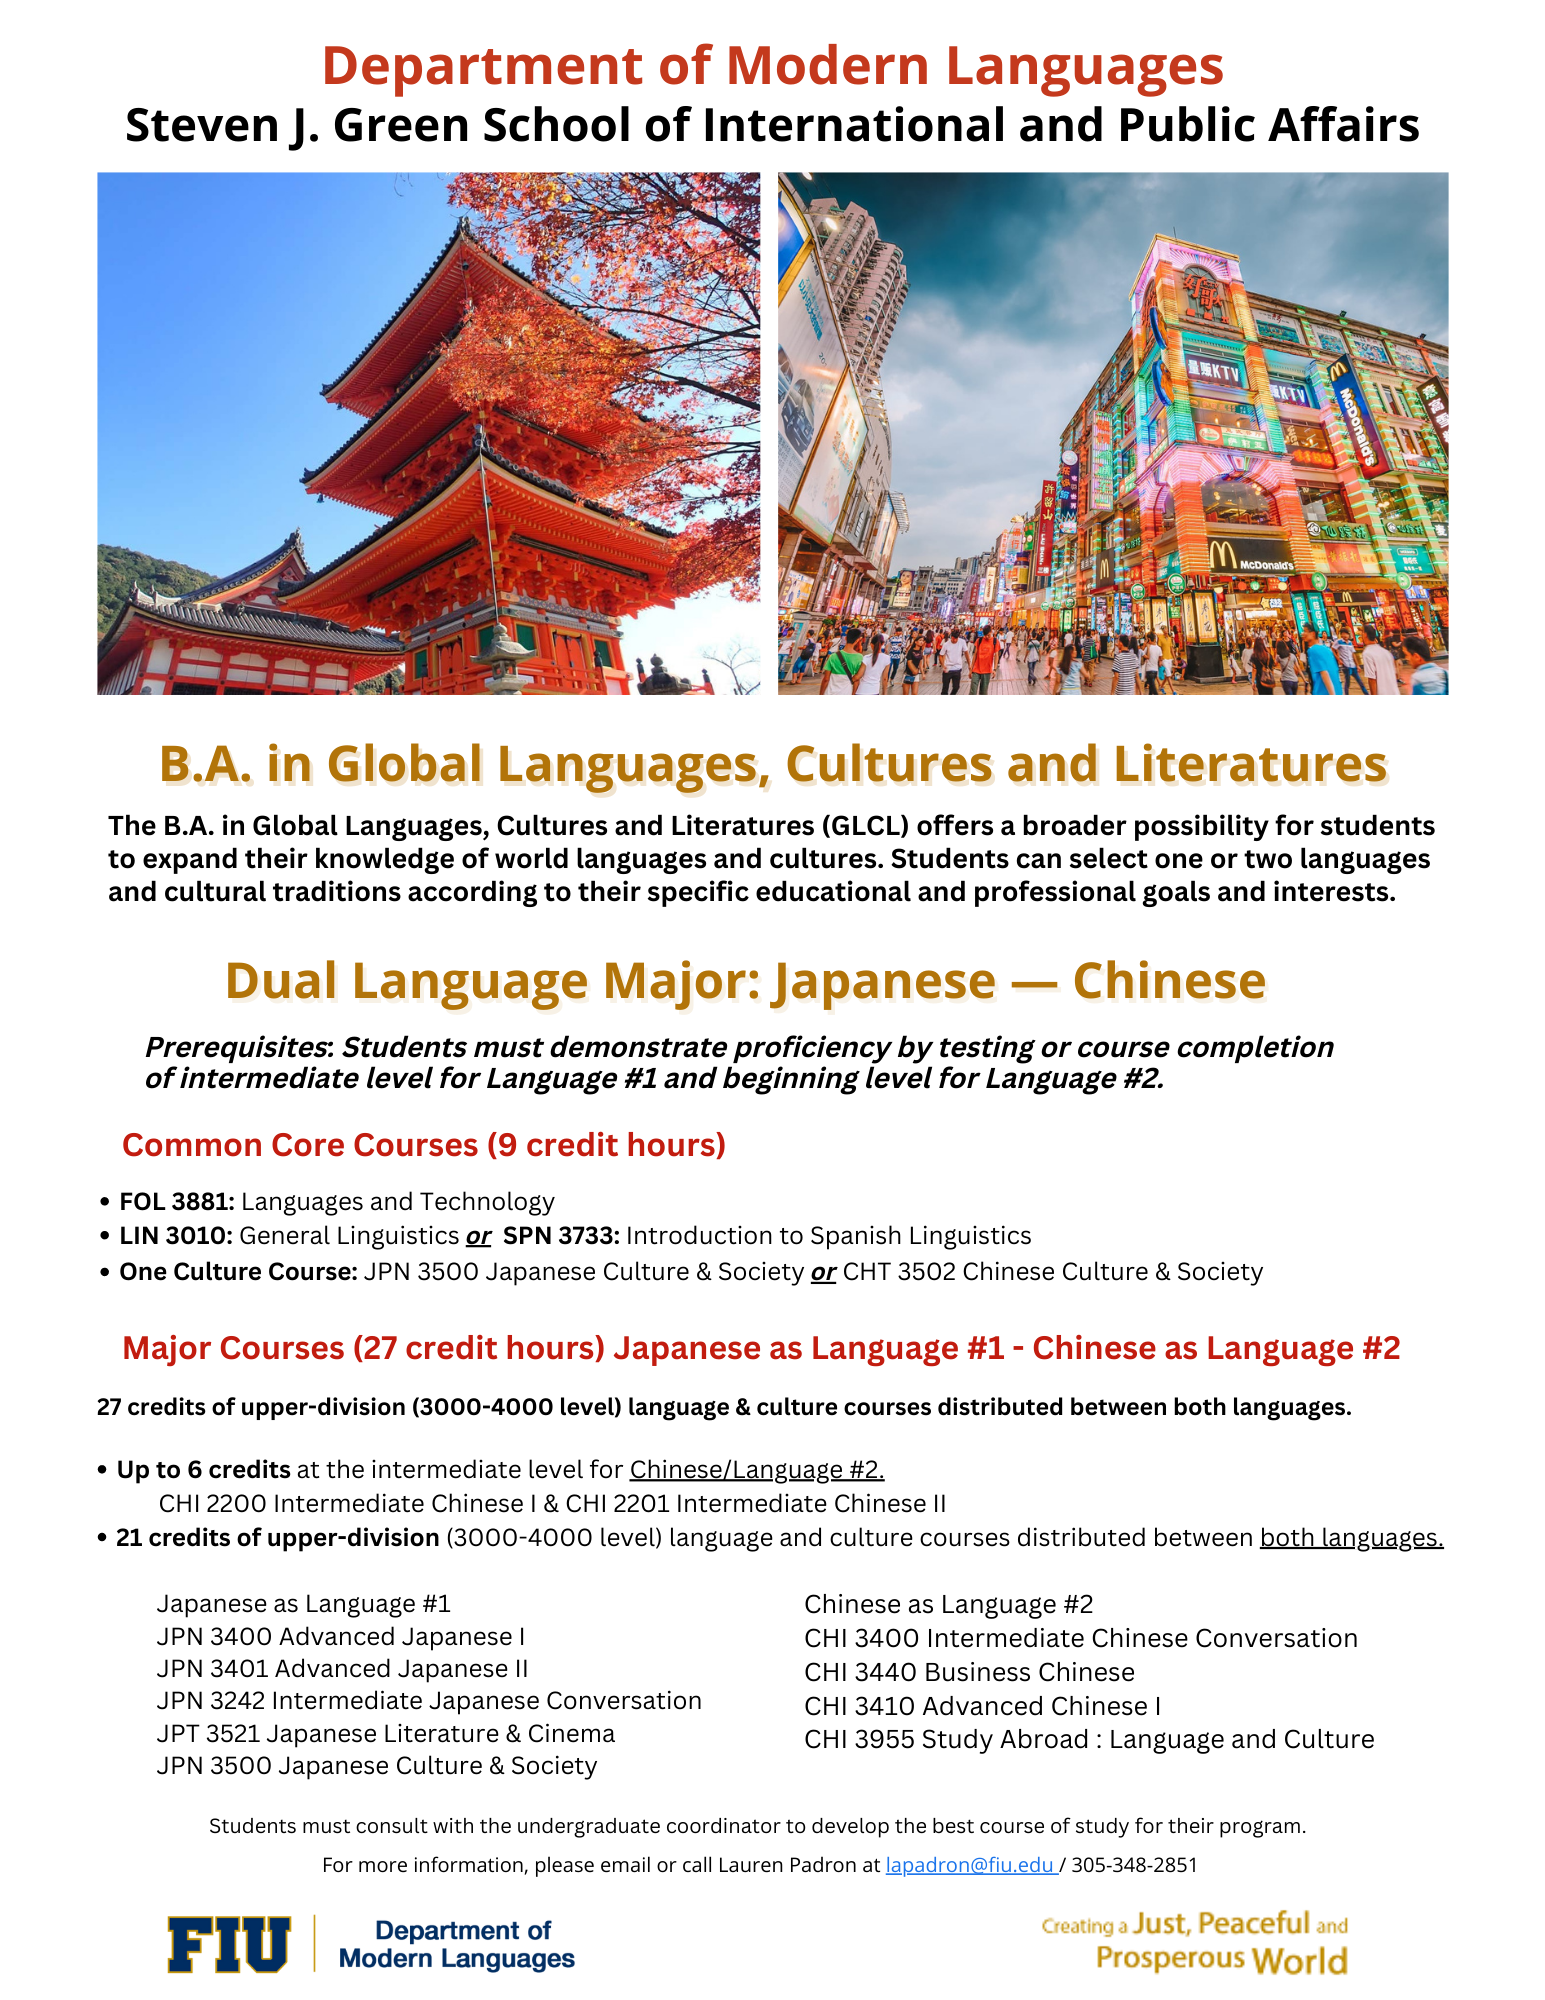 japanesechinese-flyer.png